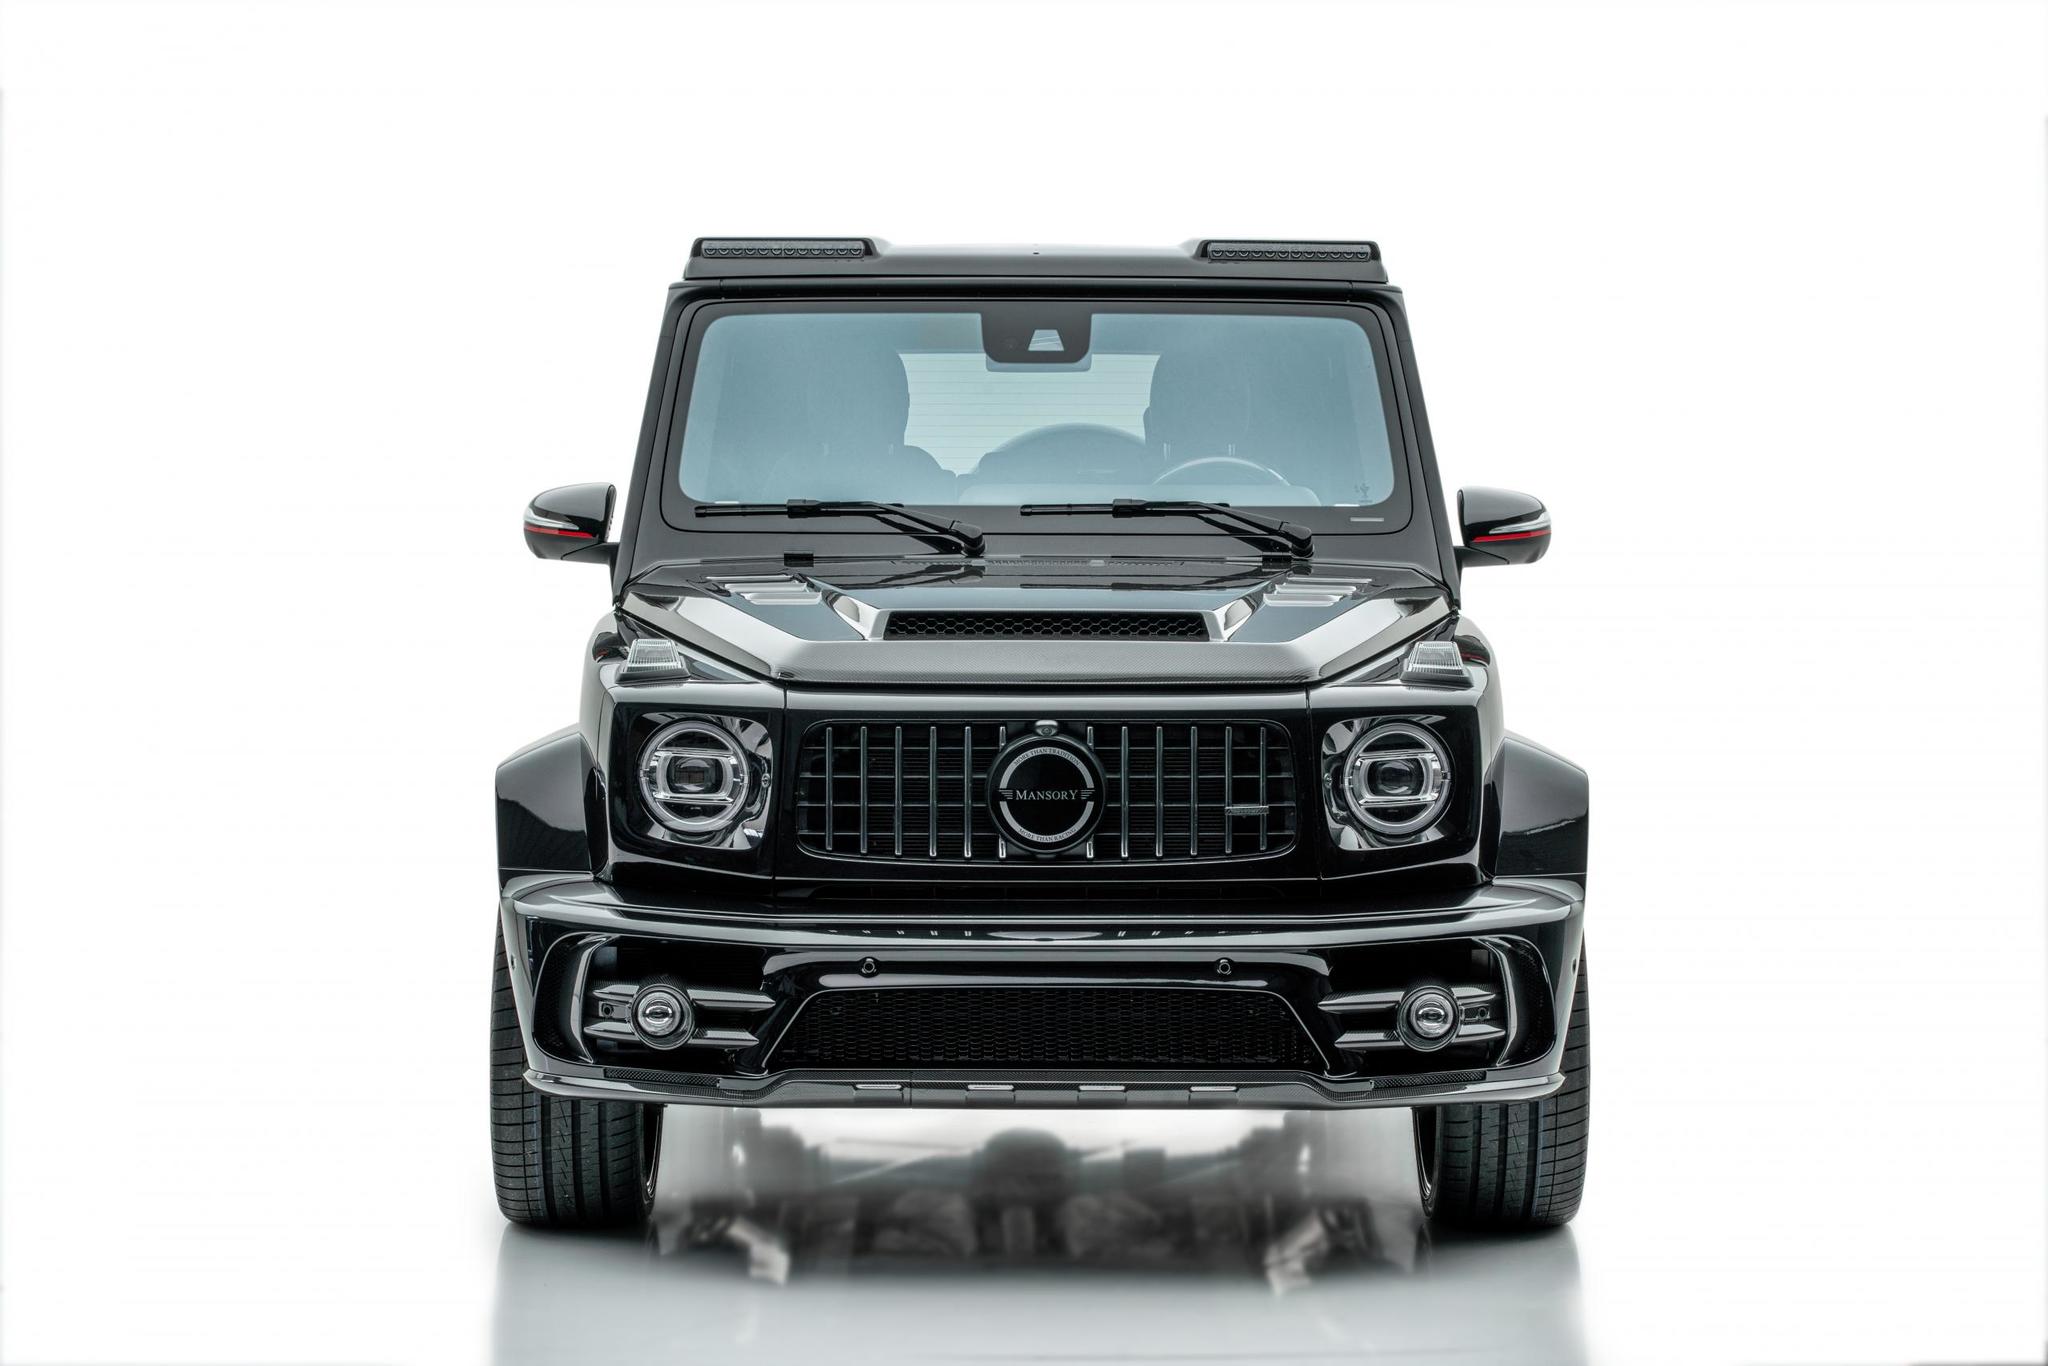 Mansory body kit for Mercedes G-class new style